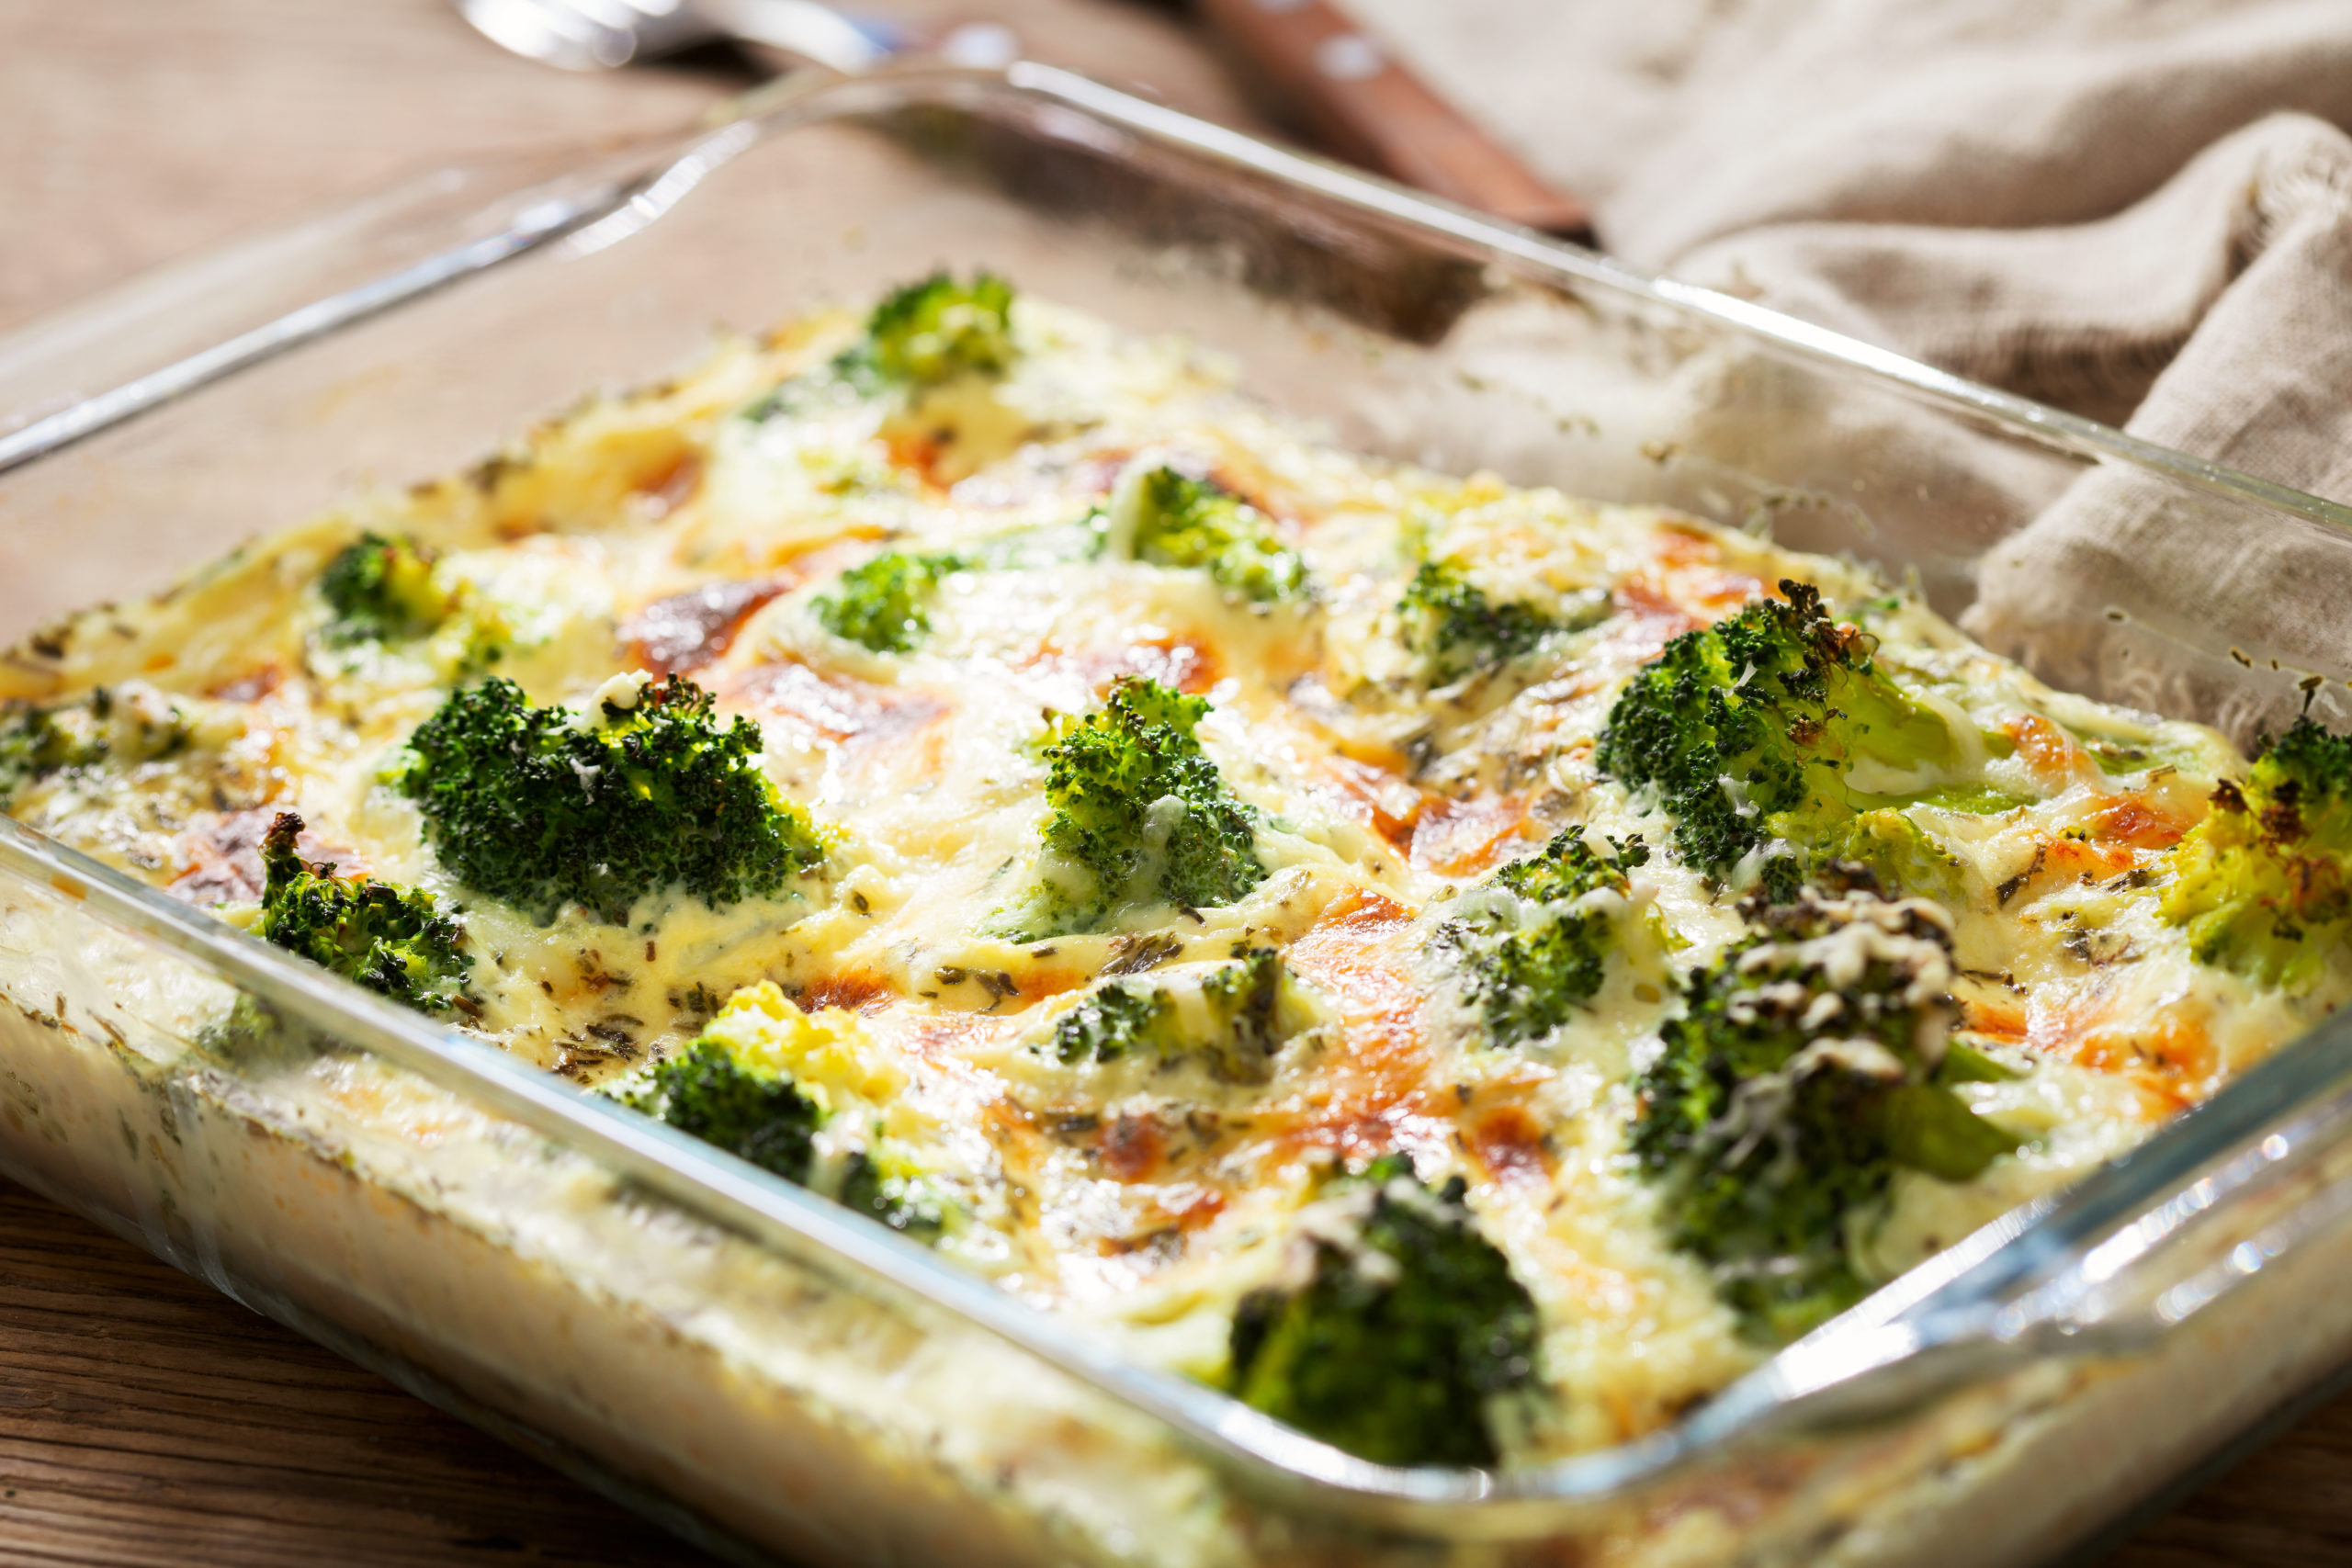 Casserole,Broccoli.,Baked,Broccoli,With,Cheese,And,Cream,Sauce,In